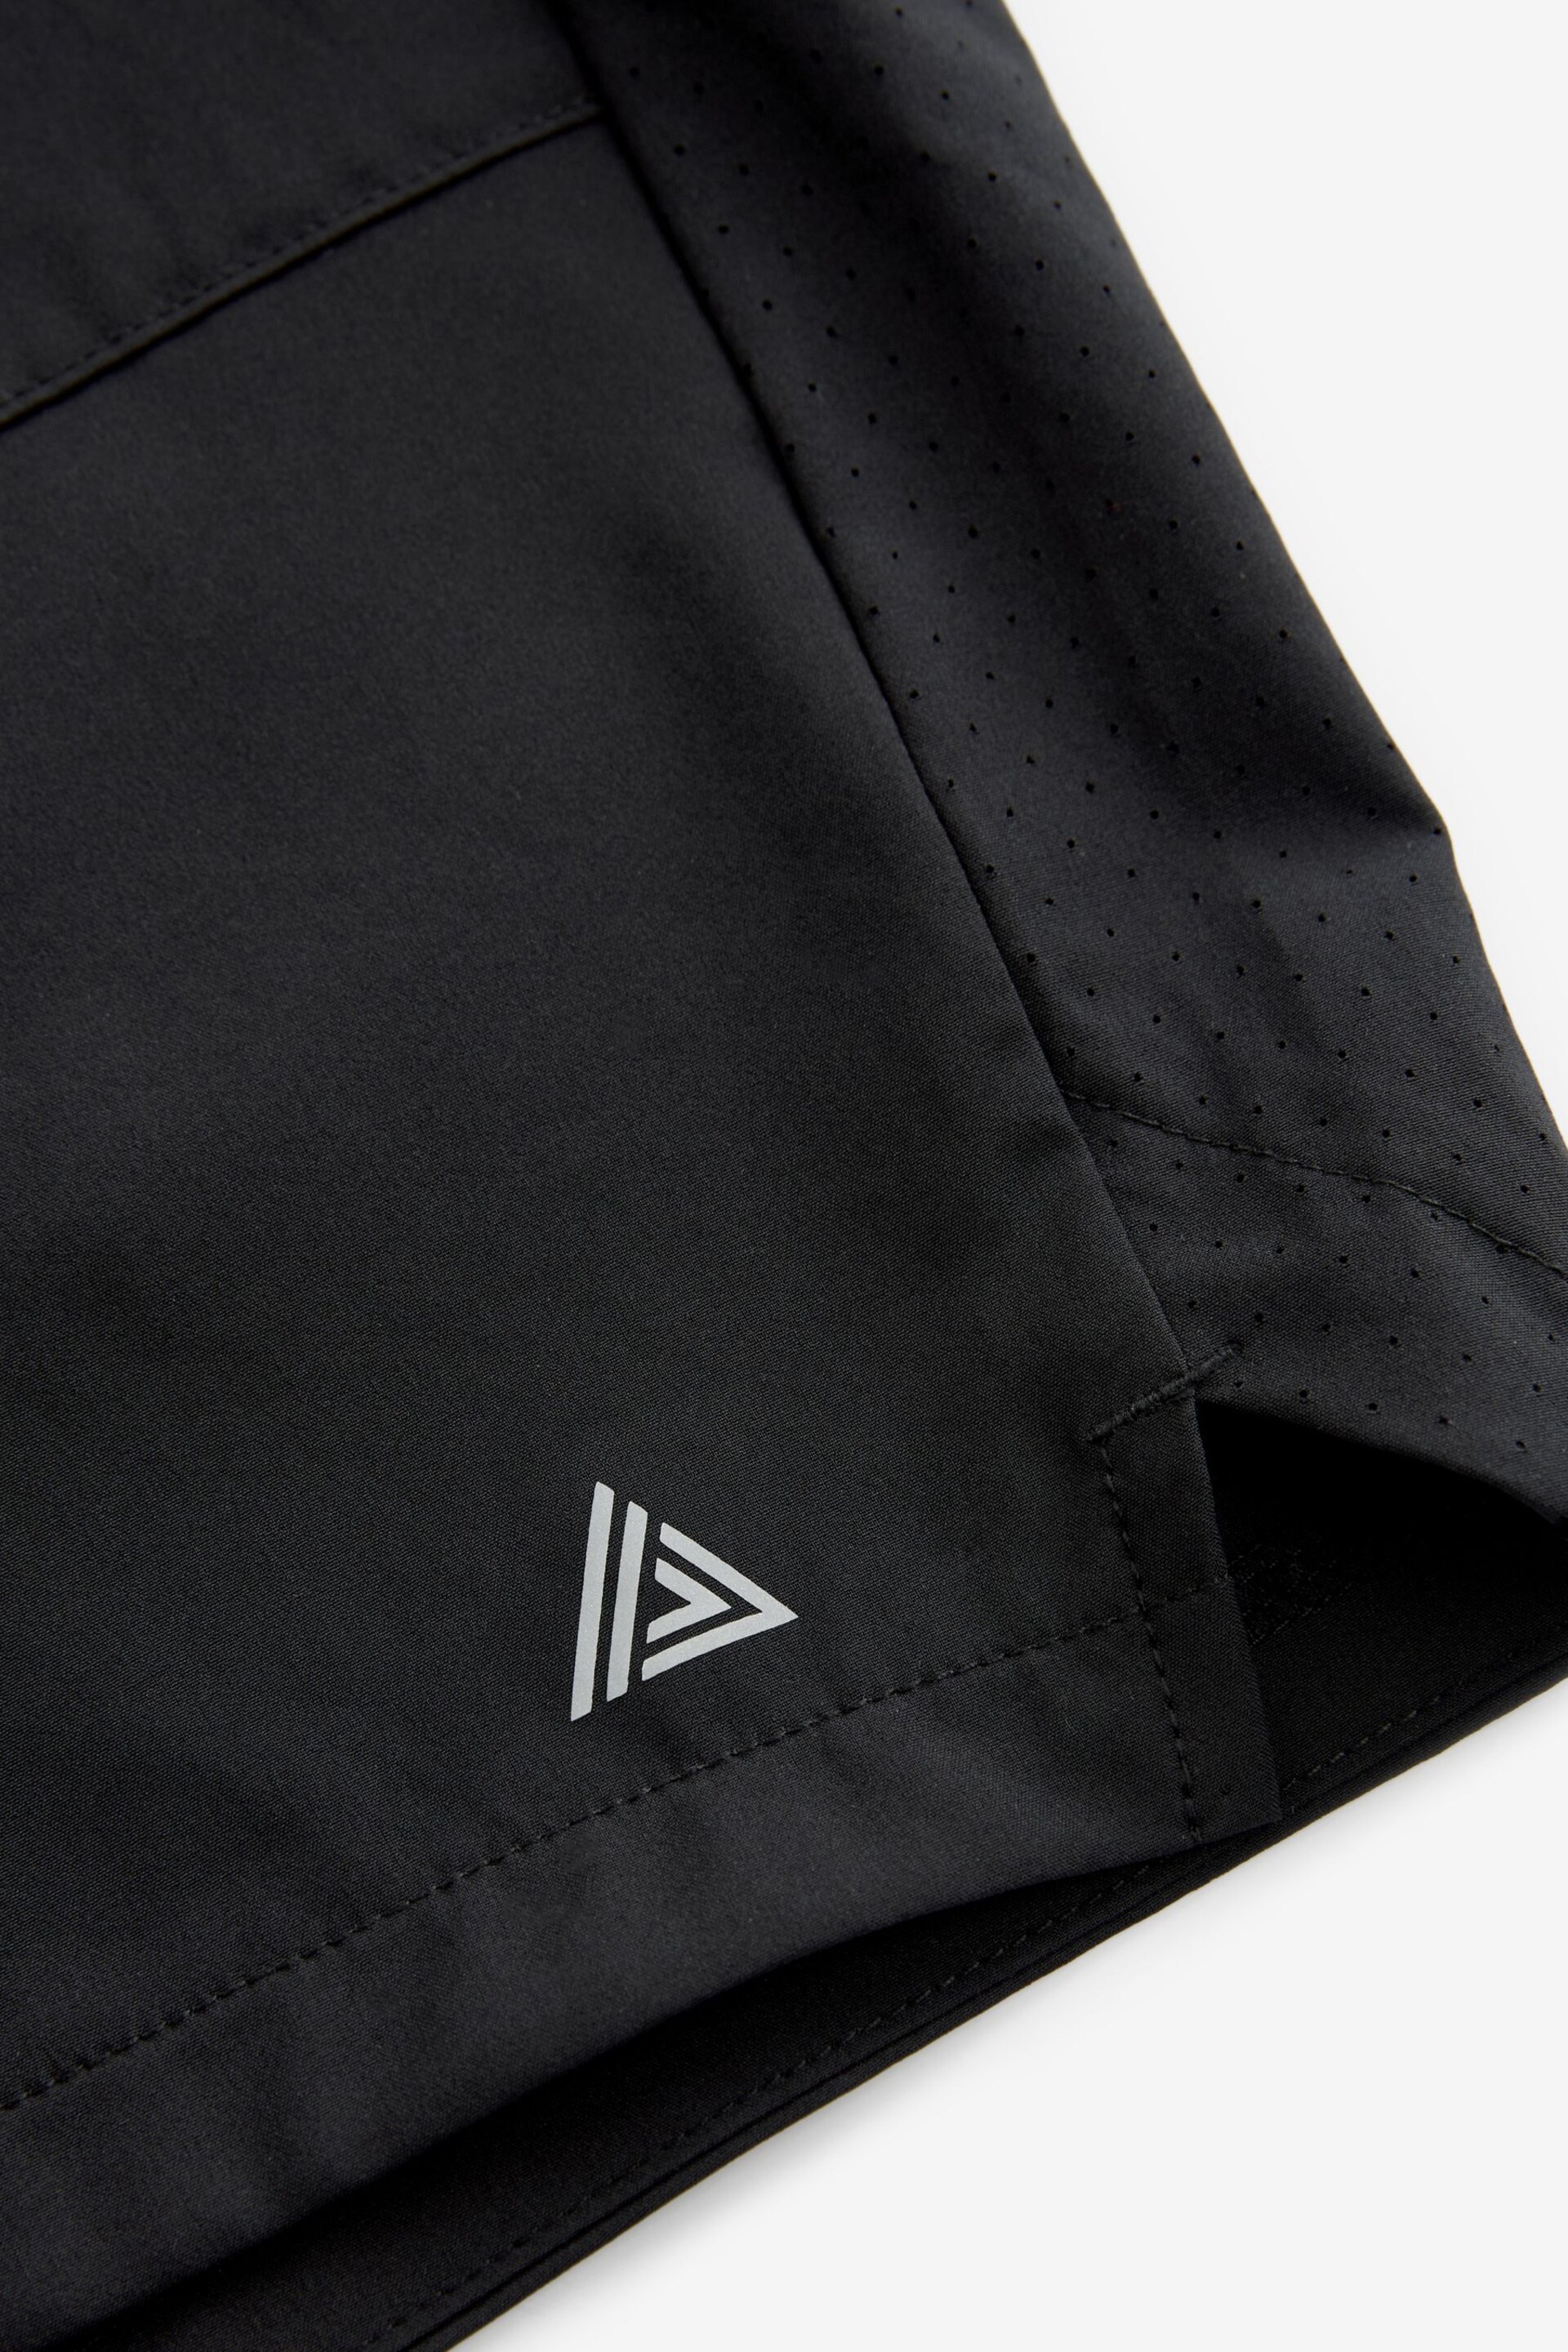 Black 5 Inch Active Gym Sports Shorts - Image 6 of 7